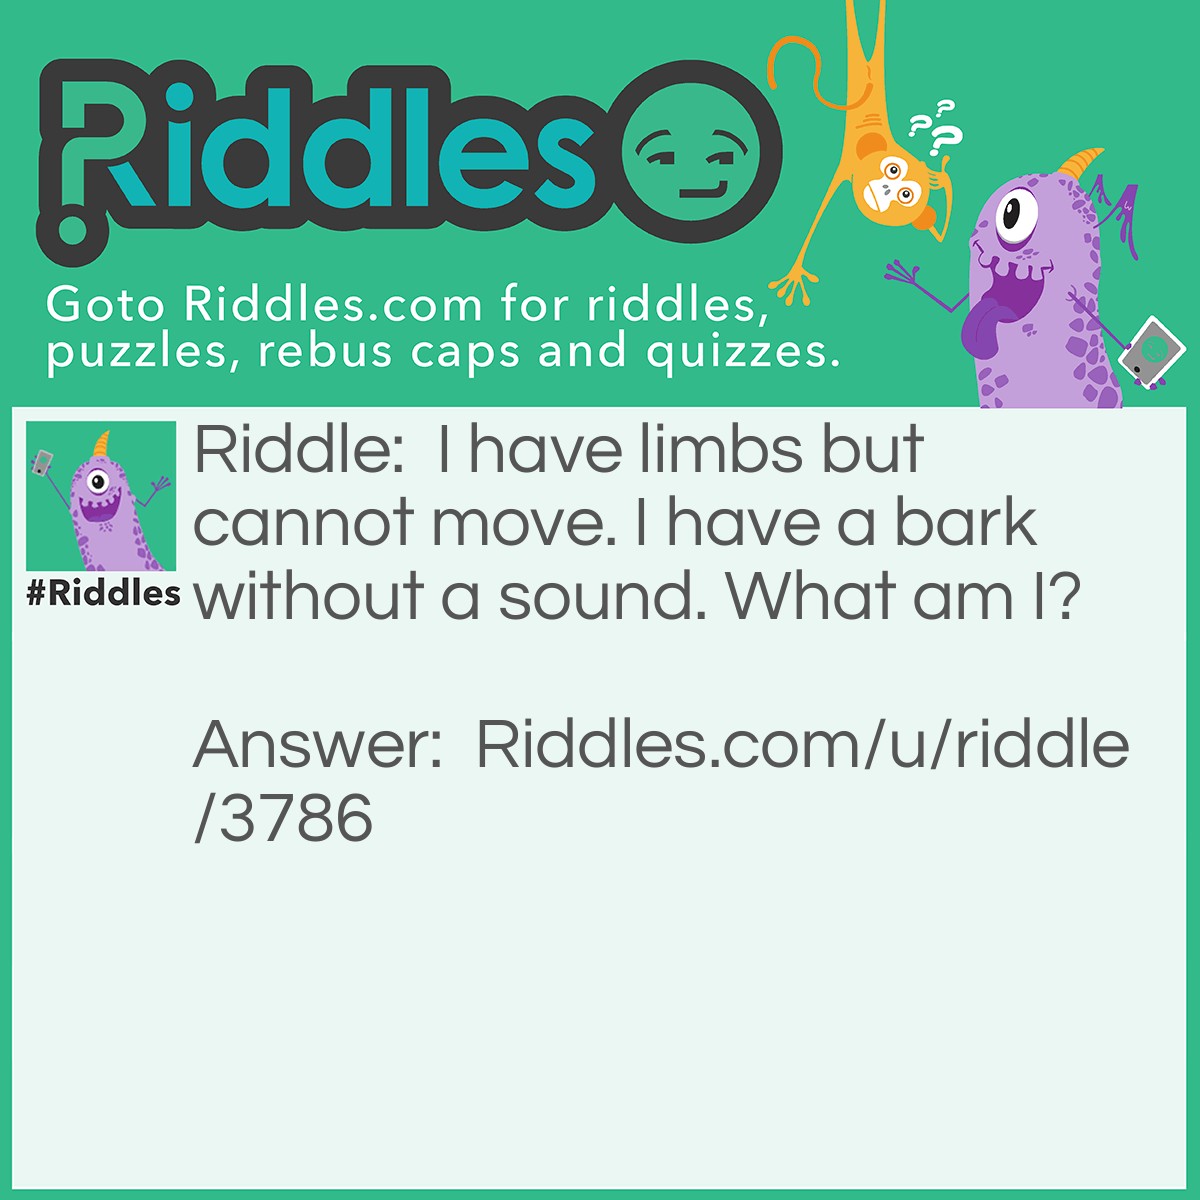 Riddle: I have limbs but cannot move. I have a bark without a sound. What am I? Answer: A tree.